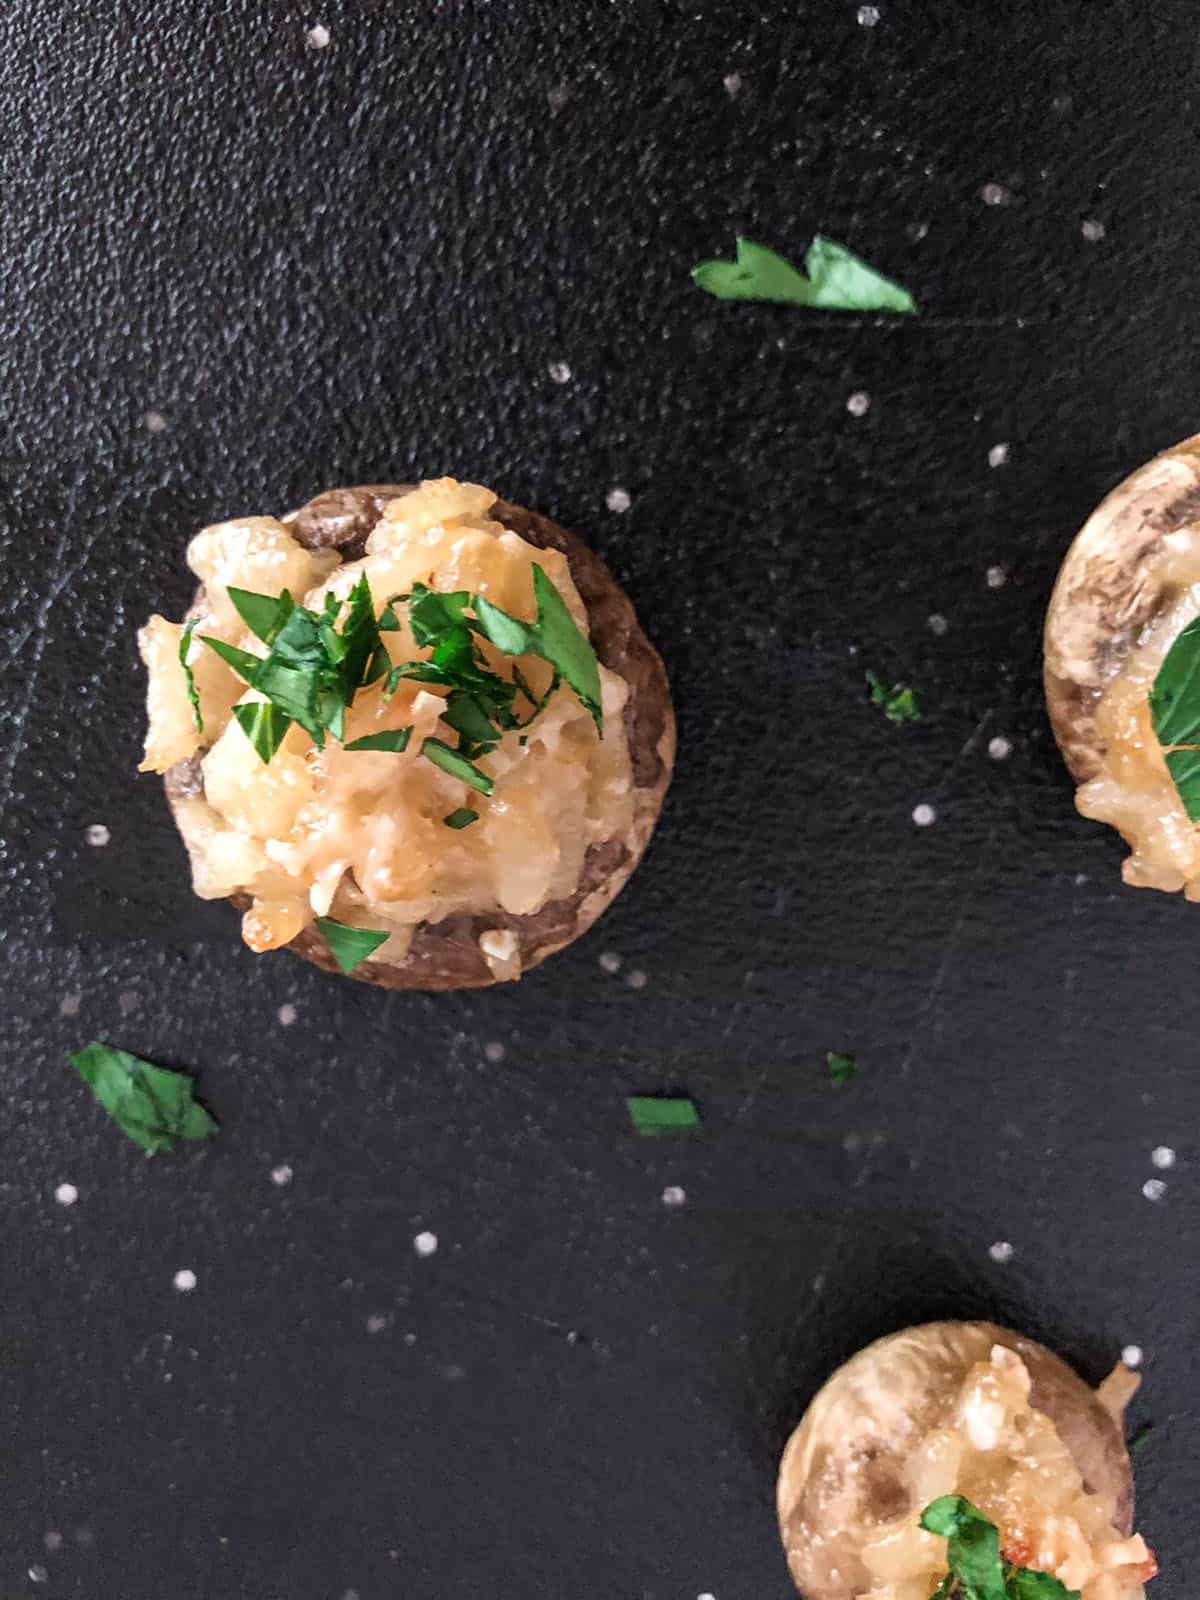 Mushroom cap filled with risotto and topped with parsley.